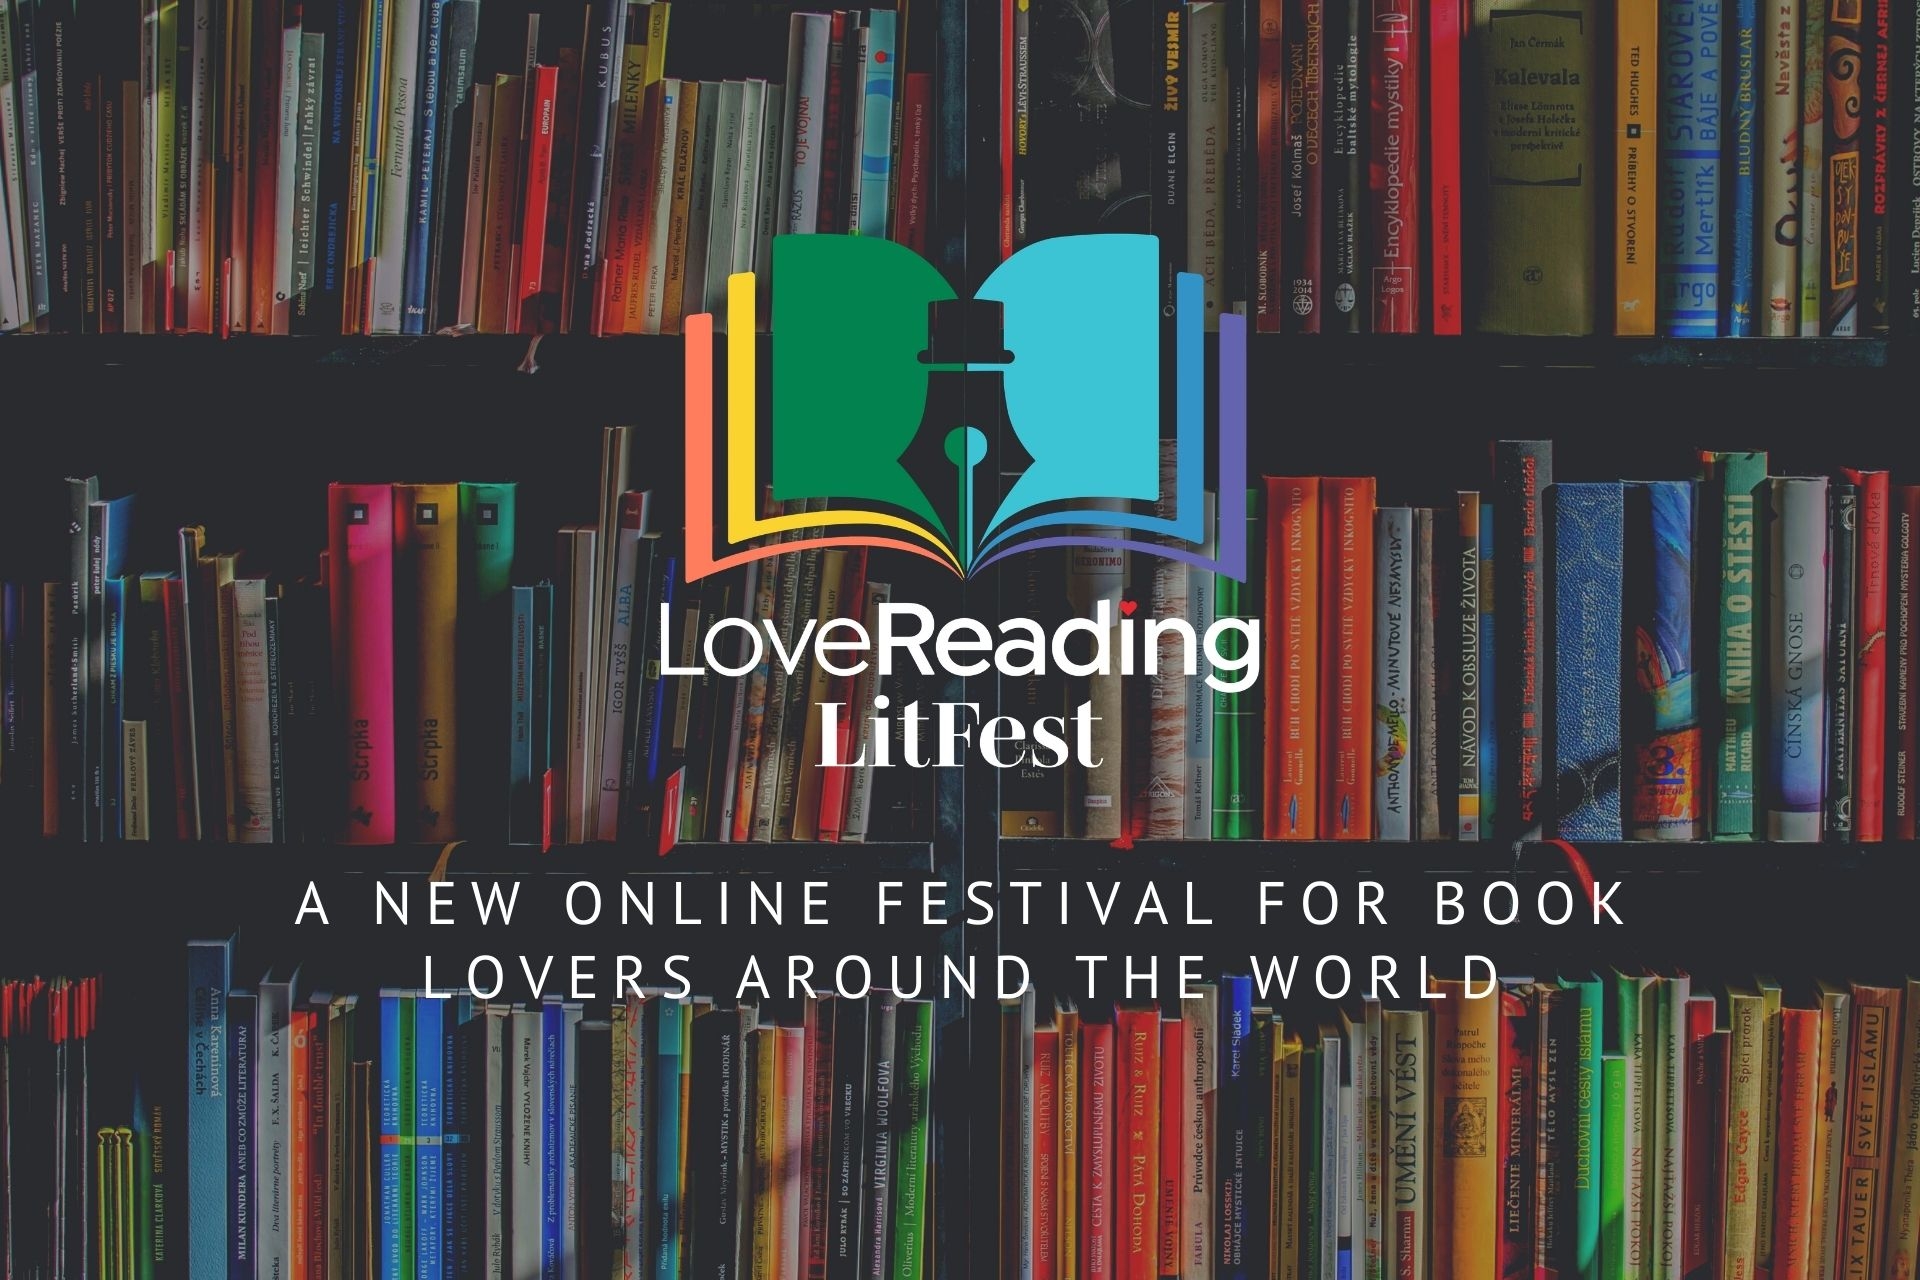 LoveReading LitFest - a New Online Festival for Book Lovers Around the World - Launches Today